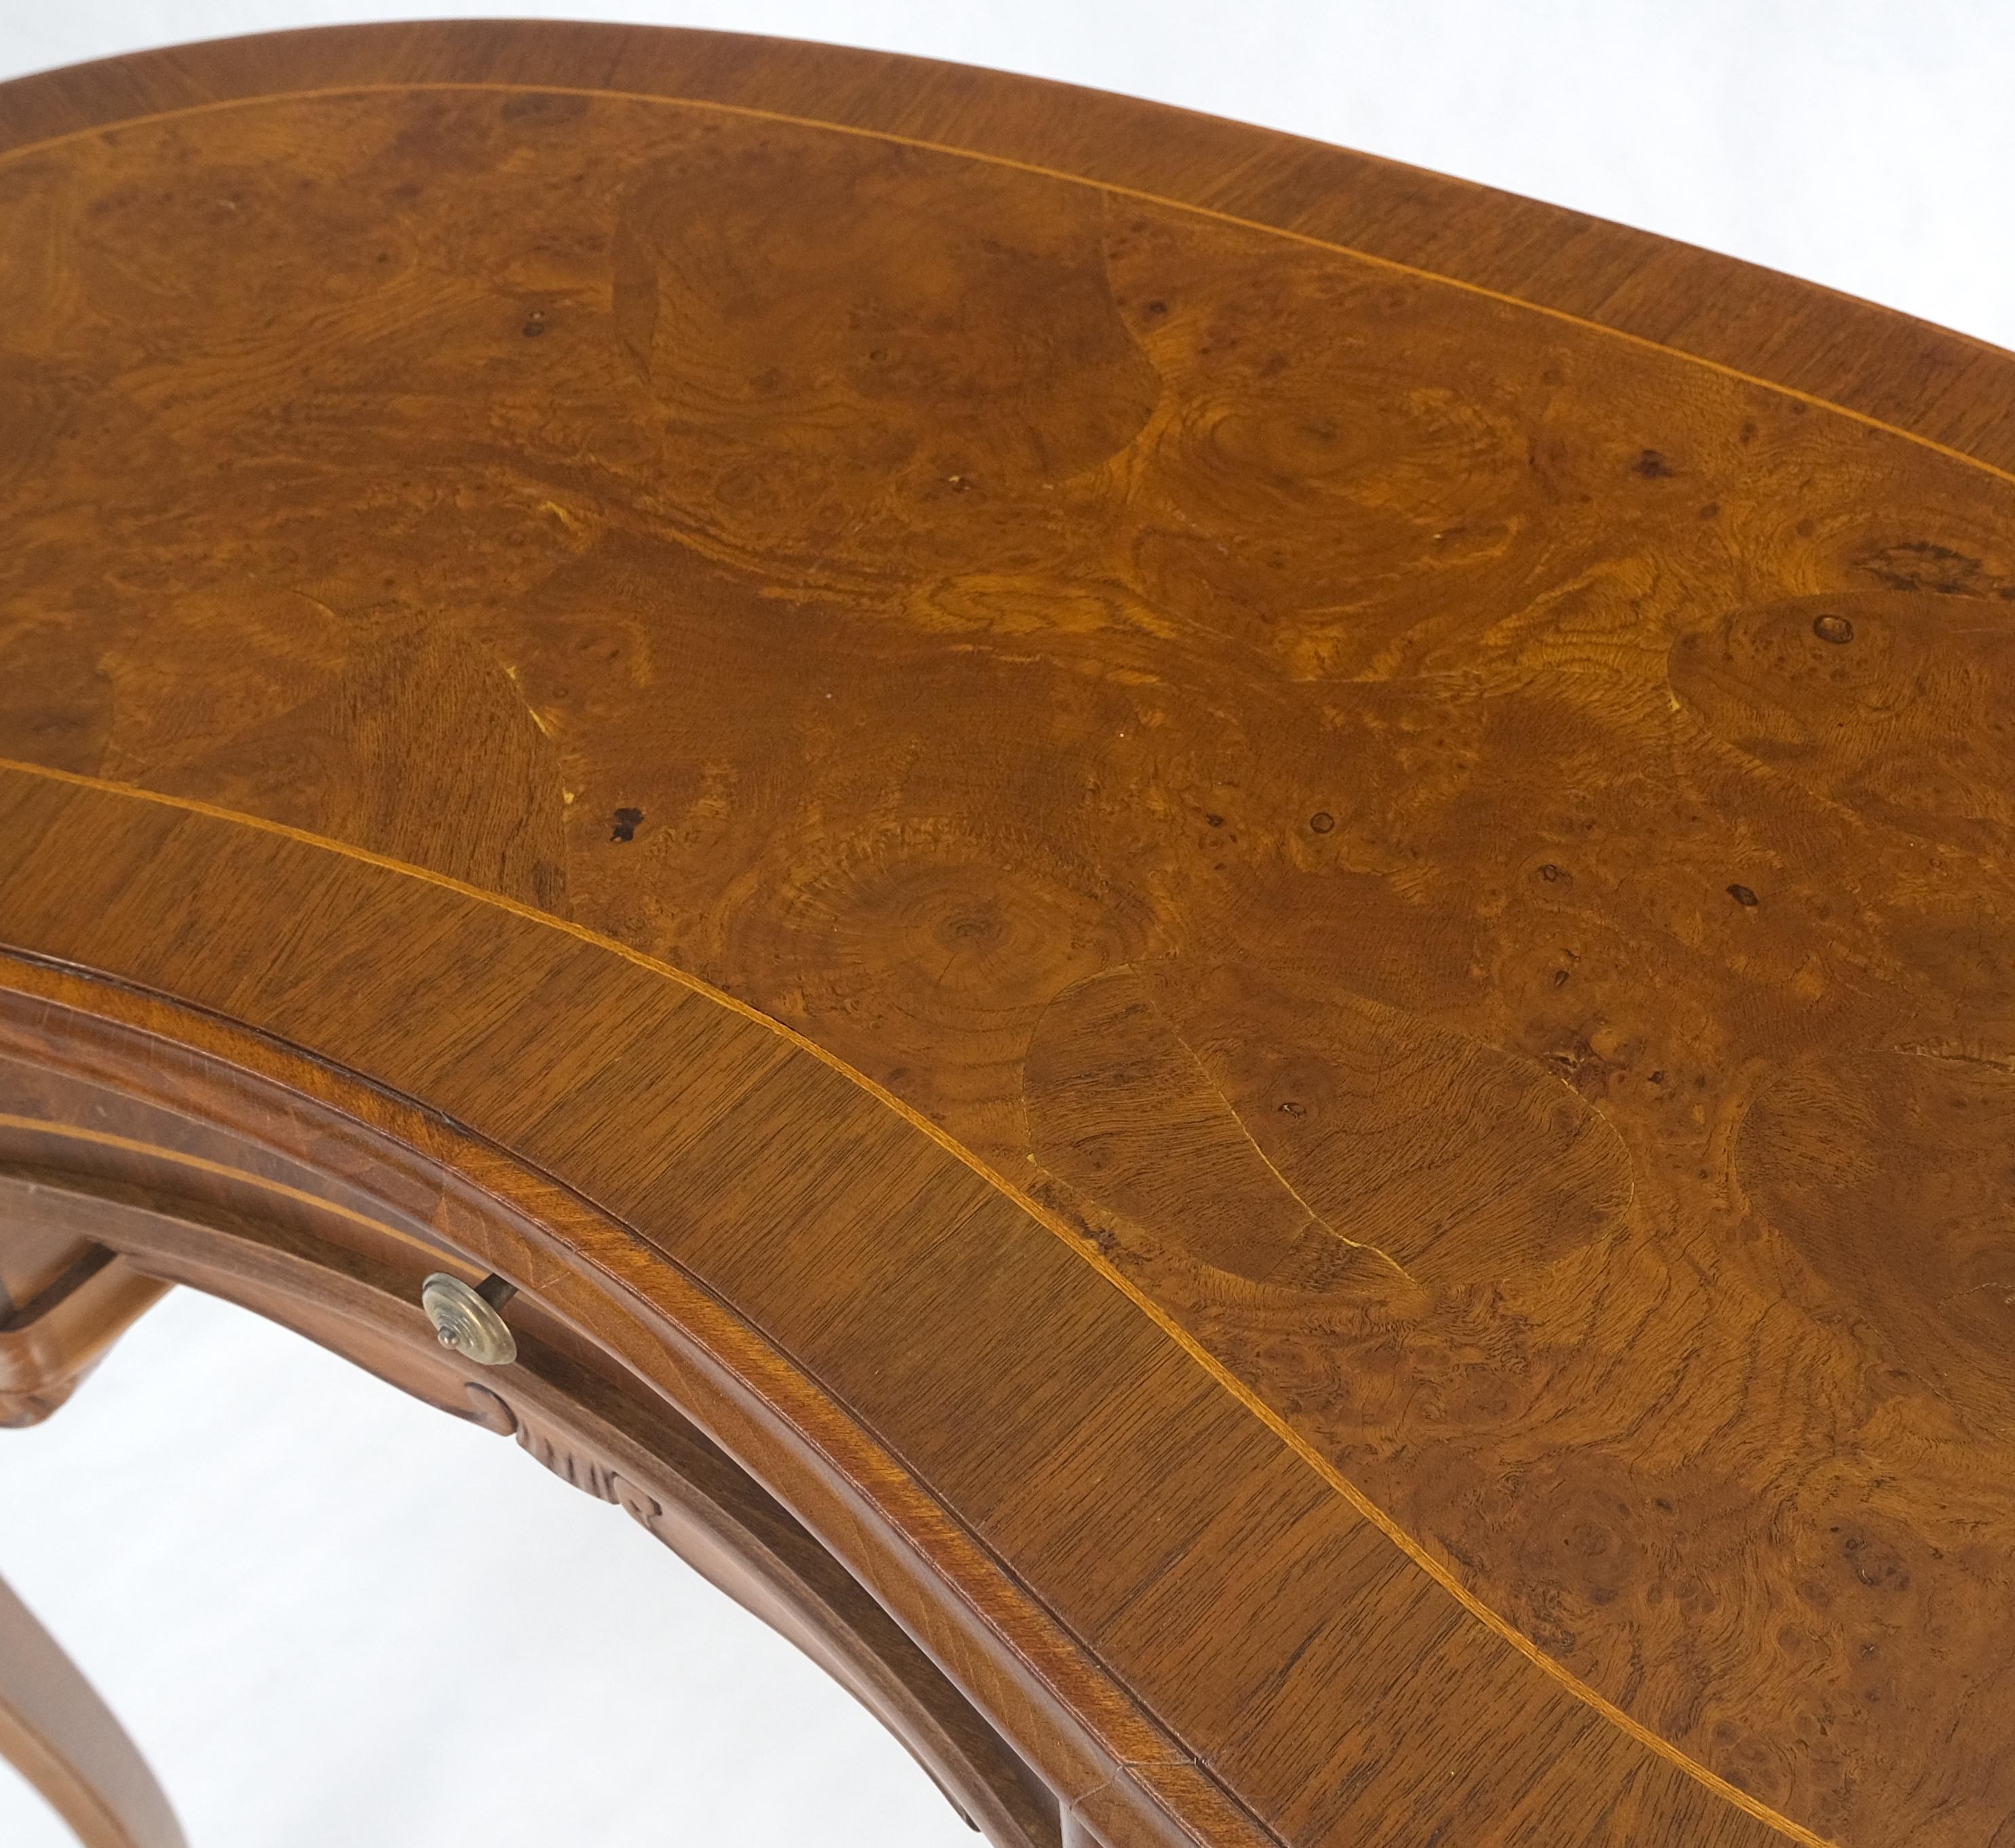 Banded Inlayed Top Carved Legs Low Profile Kidney Shape Burl Wood Compact Desk Writing Table Vanity Made in Italy Italy.